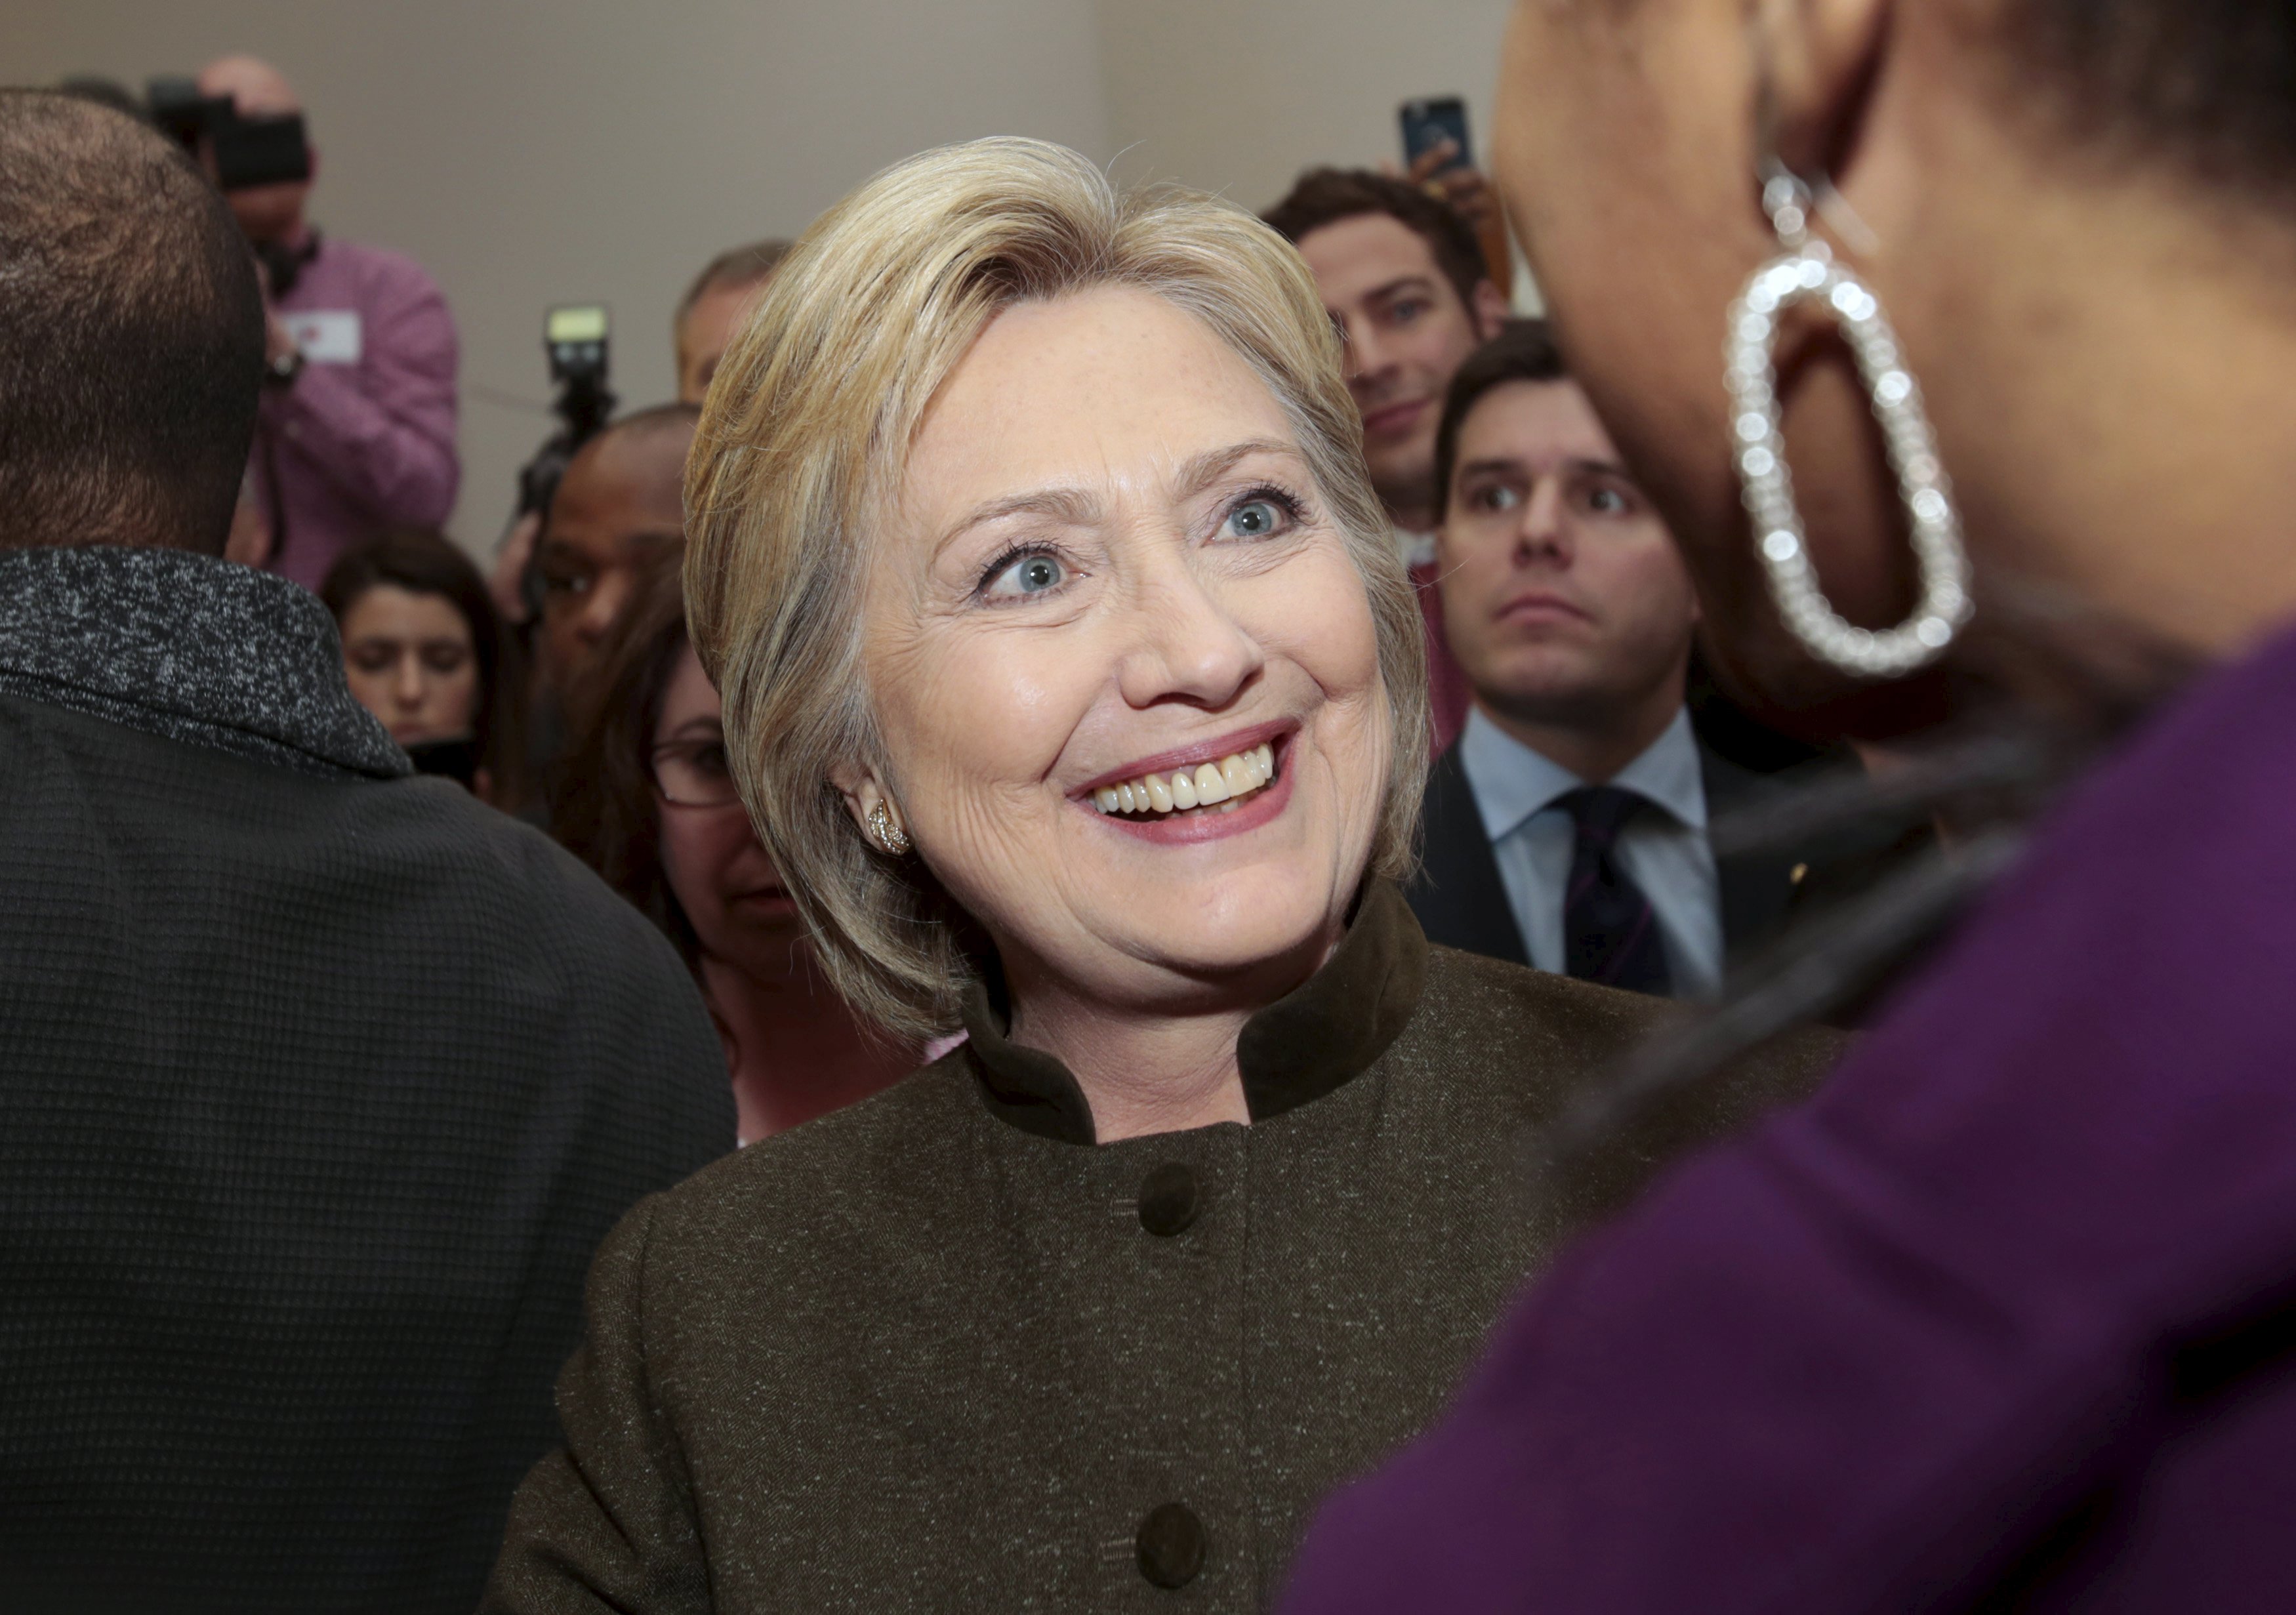 Hillary Clinton talks with a parishioner after addressing the congregation about the Flint water crisis at a Baptist church in Flint, Michigan Feb. 7, 2016